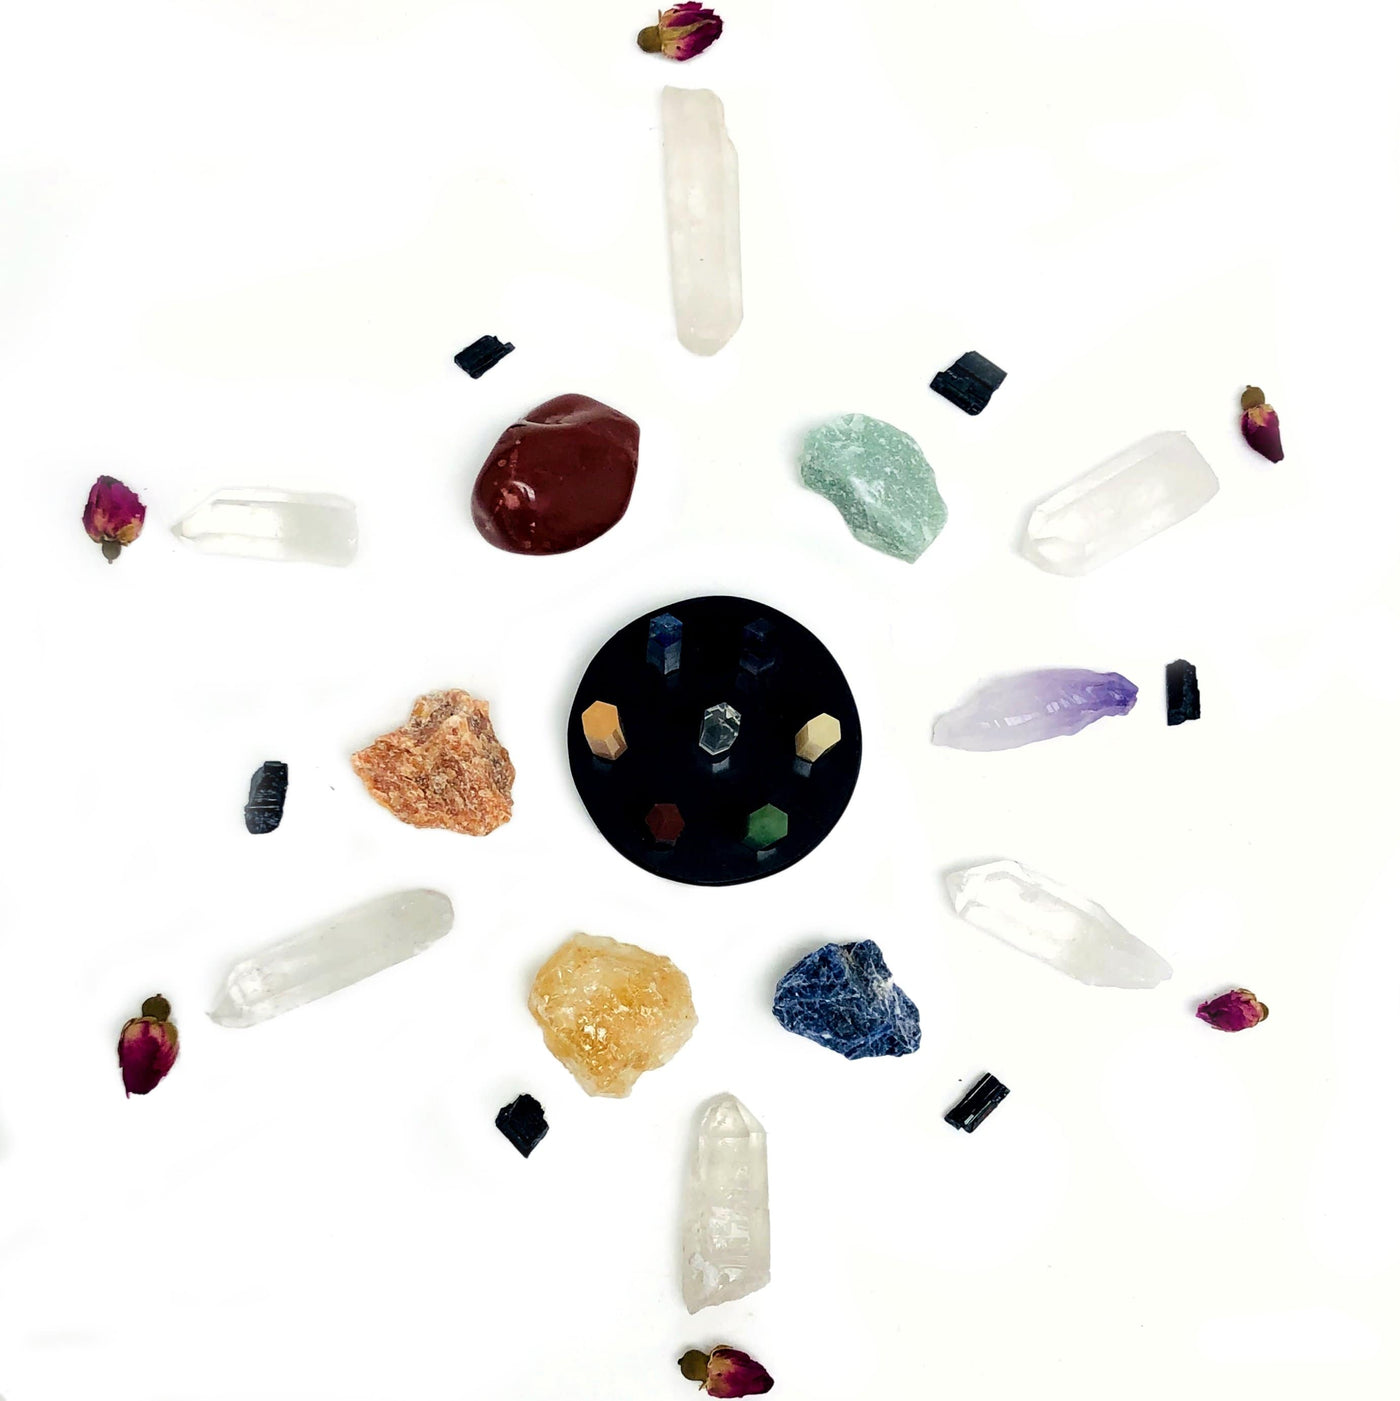 Black obsidian round disk with all seven stone points on it Amethyst, Crystal Quartz, Lapiz Lazuli, Green Aventurine, Peach Aventurine, Yellow Aventurine, and Red Jasper. Overhead view with other crystals scattered for decorative purposes only.